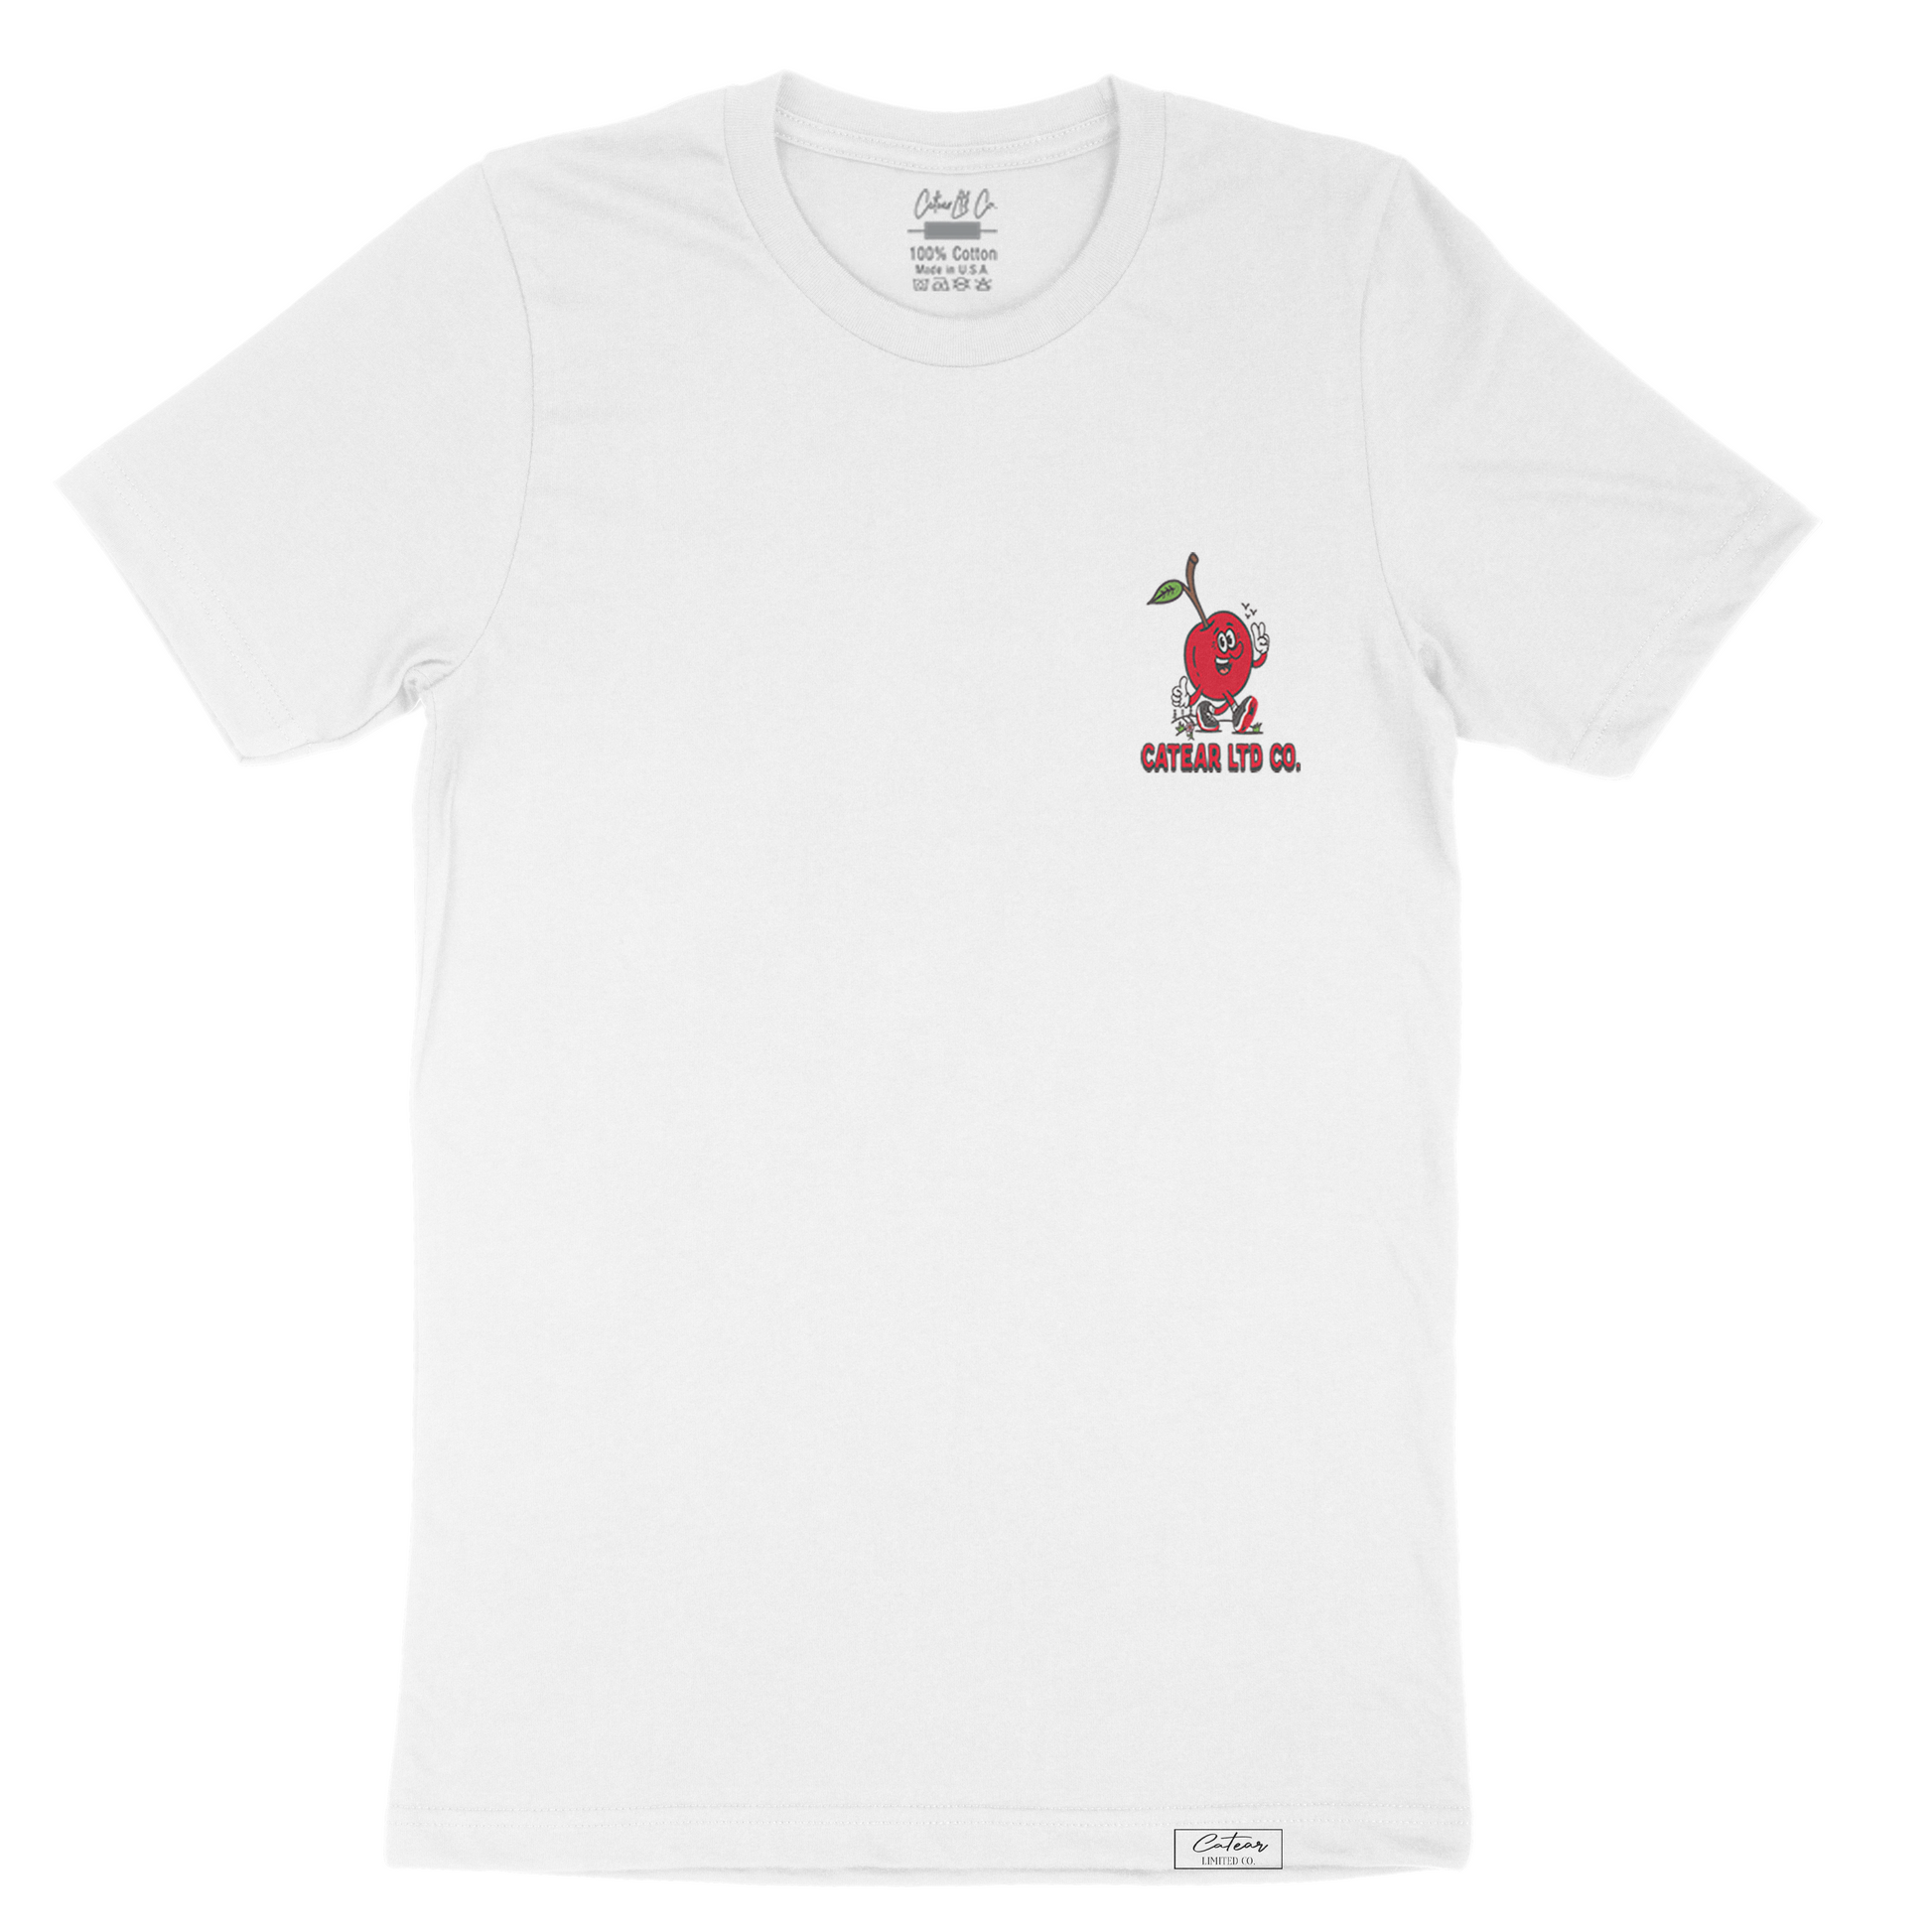 Unisex White color tee with walking cherry & CATEAR brand name screen printed on the front left chest, woven label on bottom left. Relaxed Fit & great feel.